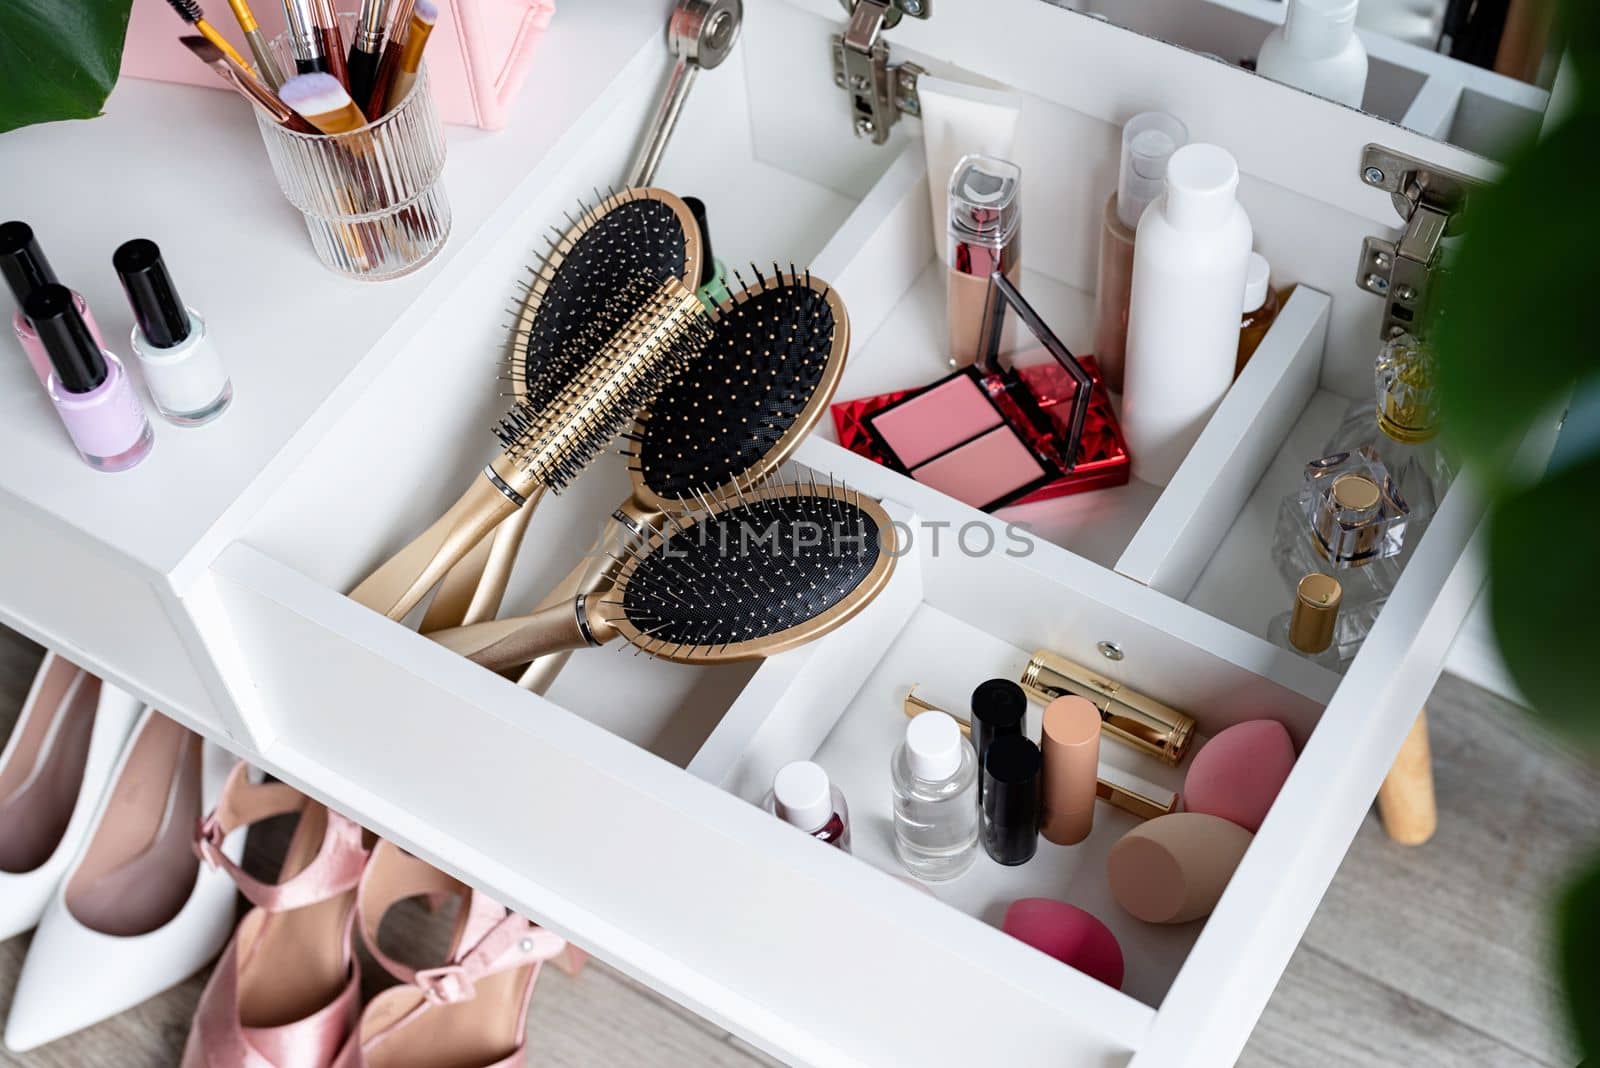 Stylish light room interior with elegant vanity table and plants, beauty and fashion. closeup of elegant high heel shoes standing under feminine dressing table